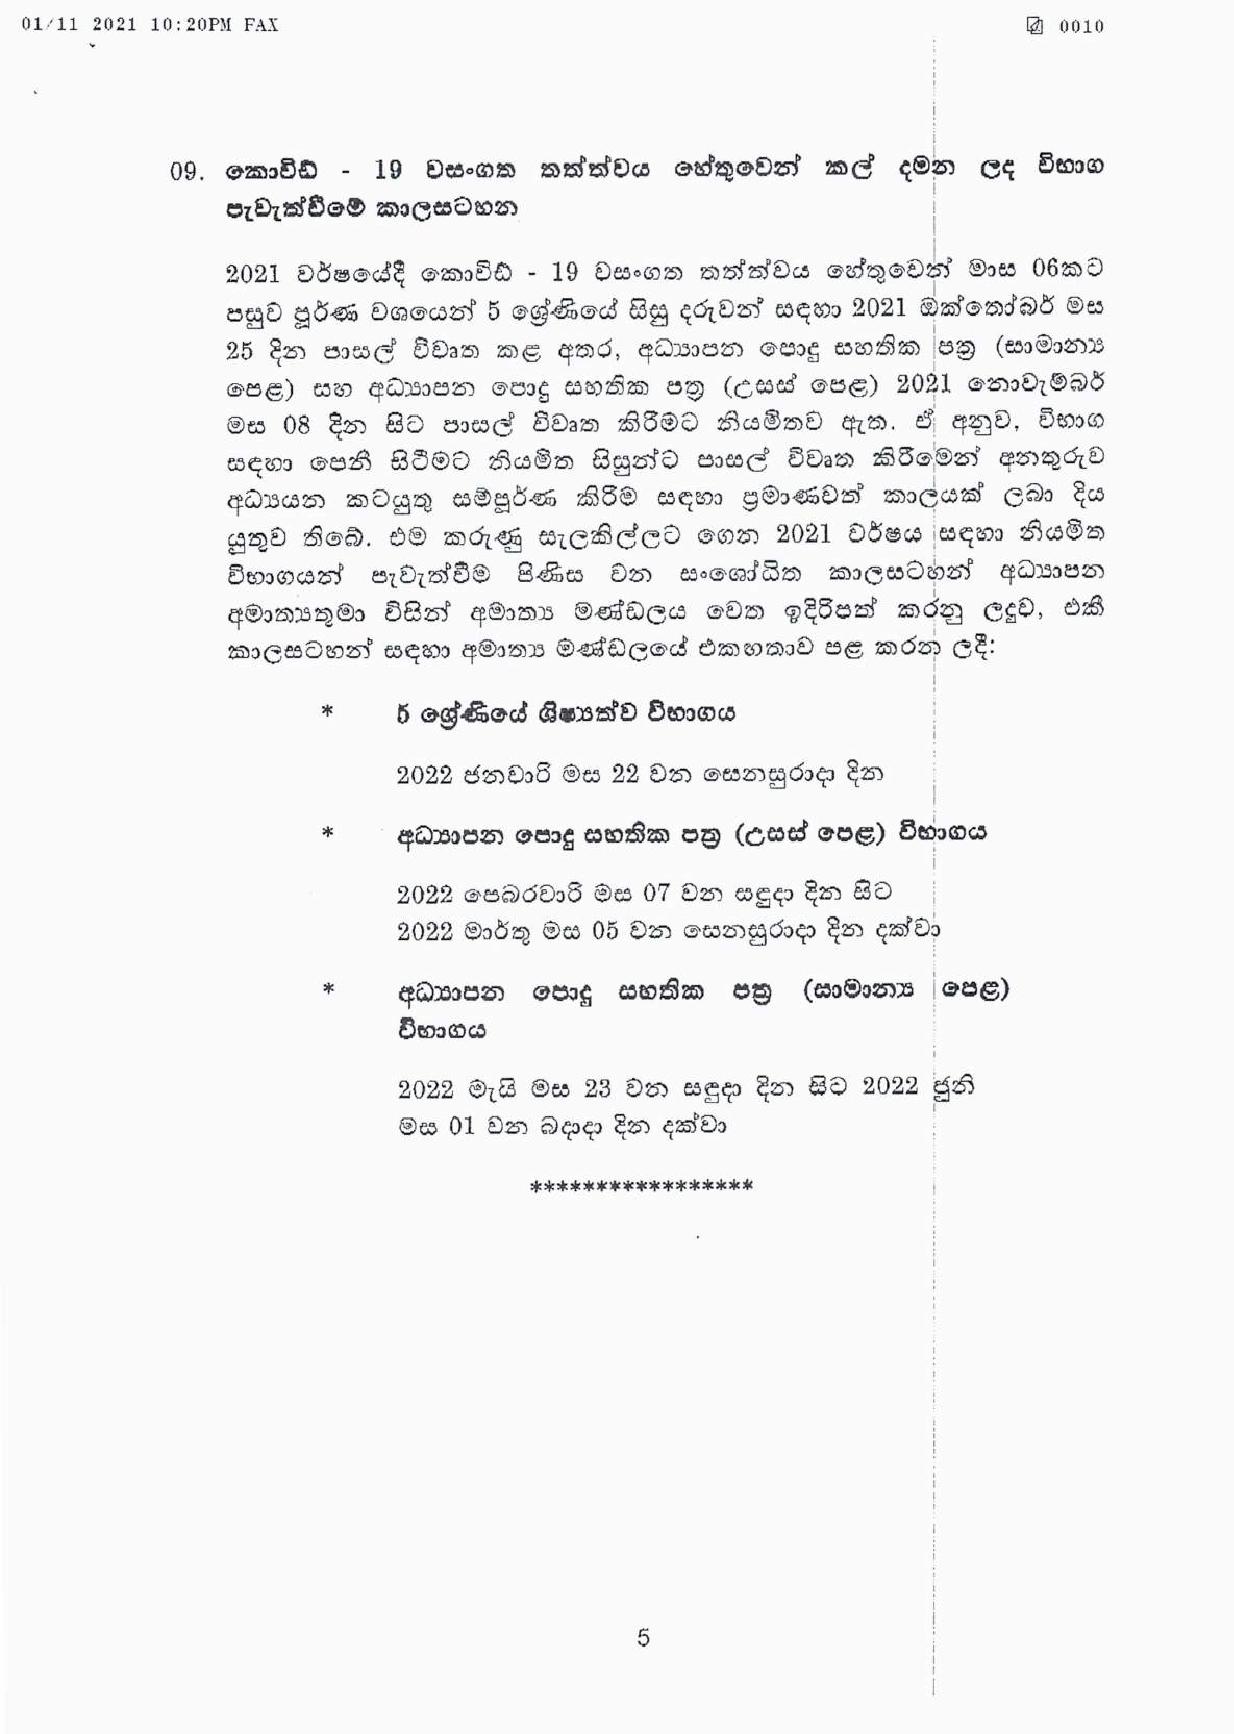 Cabinet Decisions on 01.11.2021 page 005